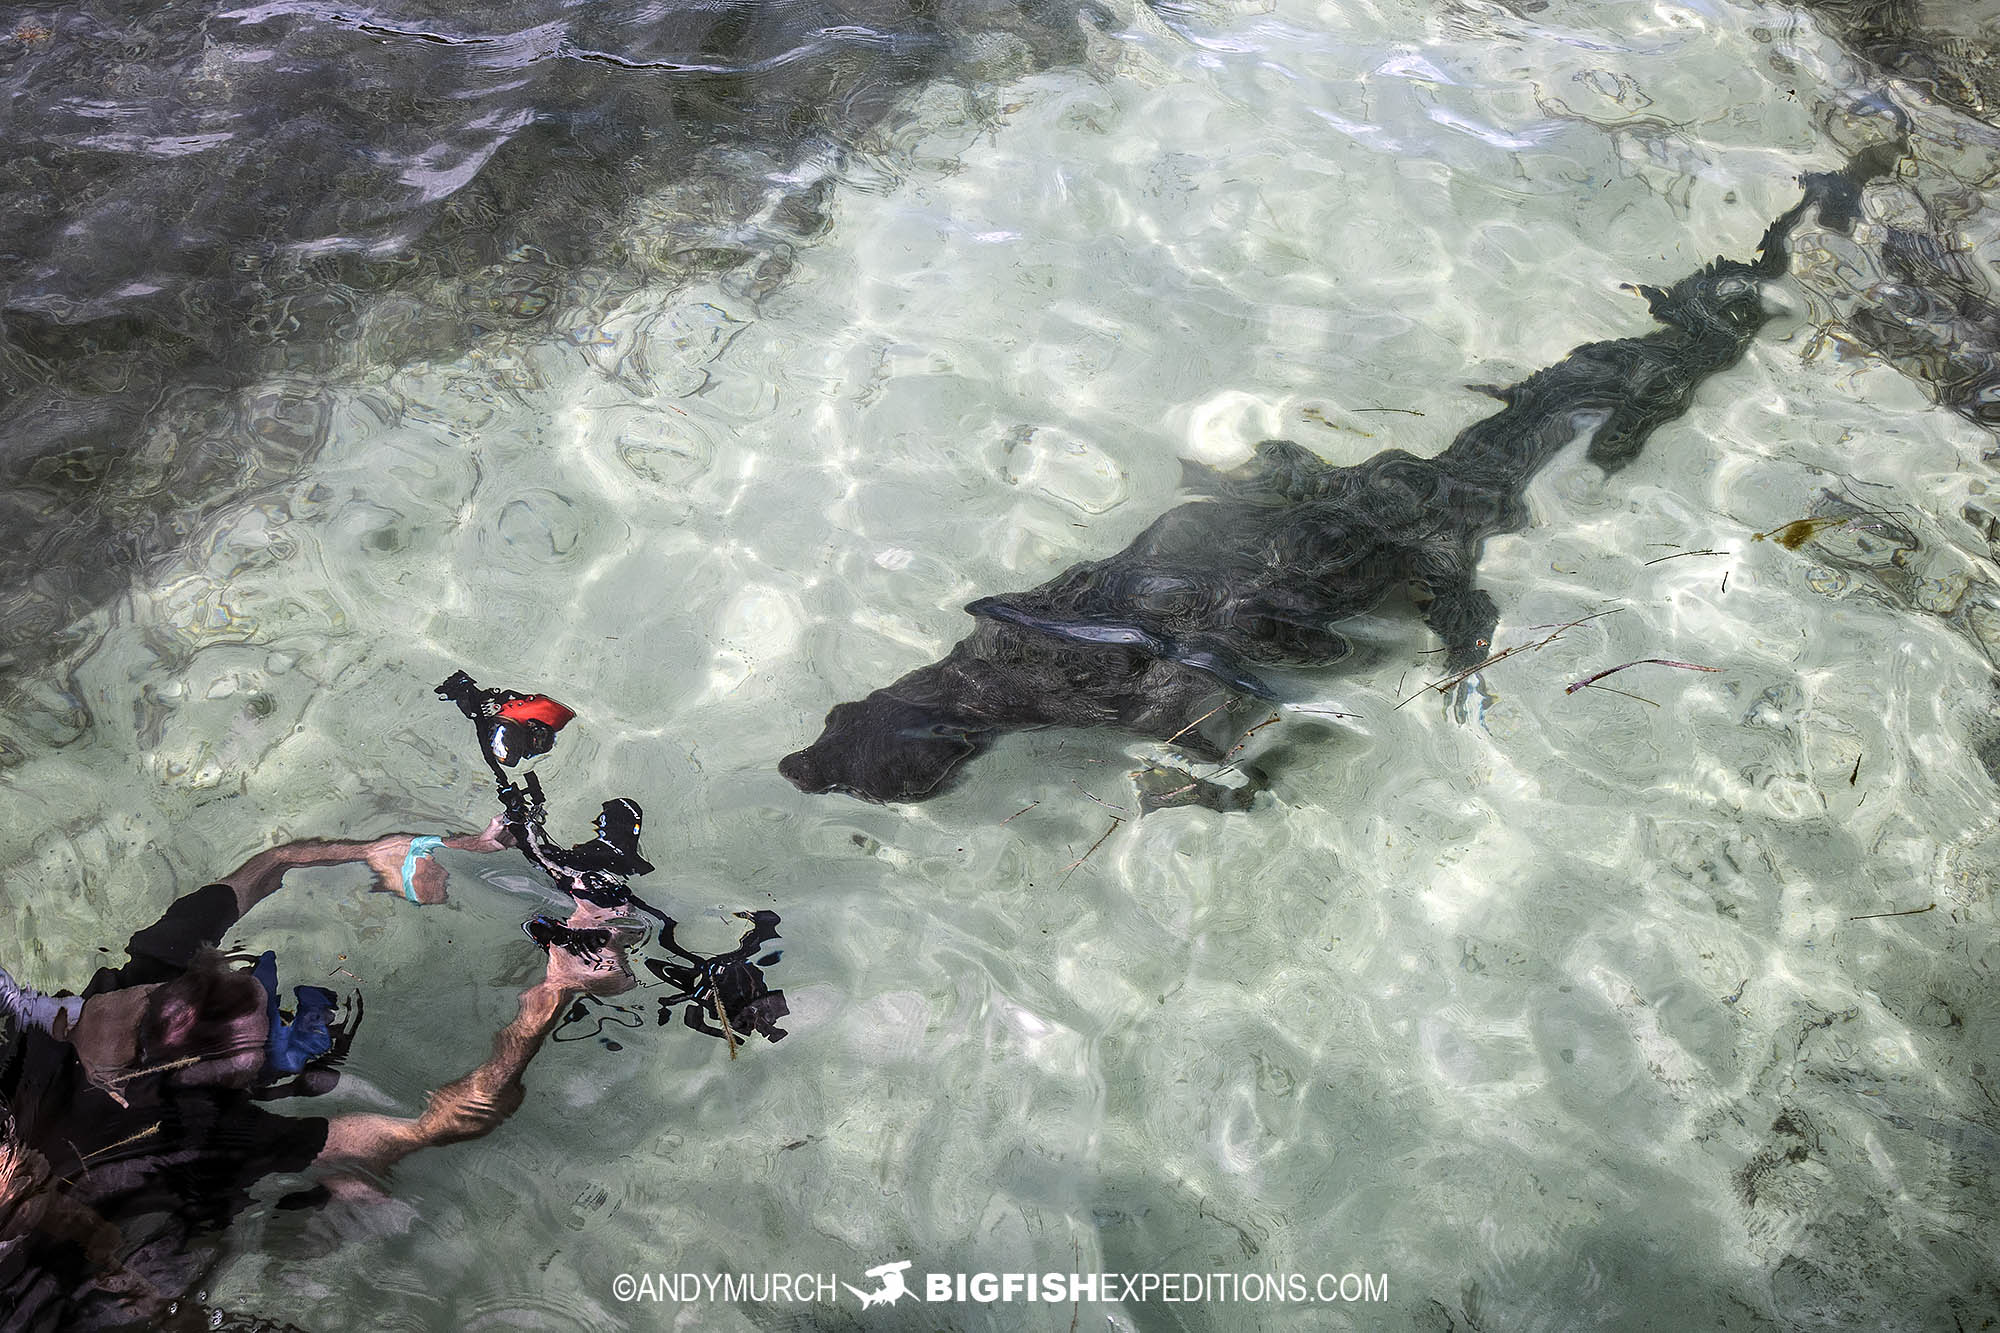 Snorkeling with crocodiles at Banco Chichorro in Mexico in 2023